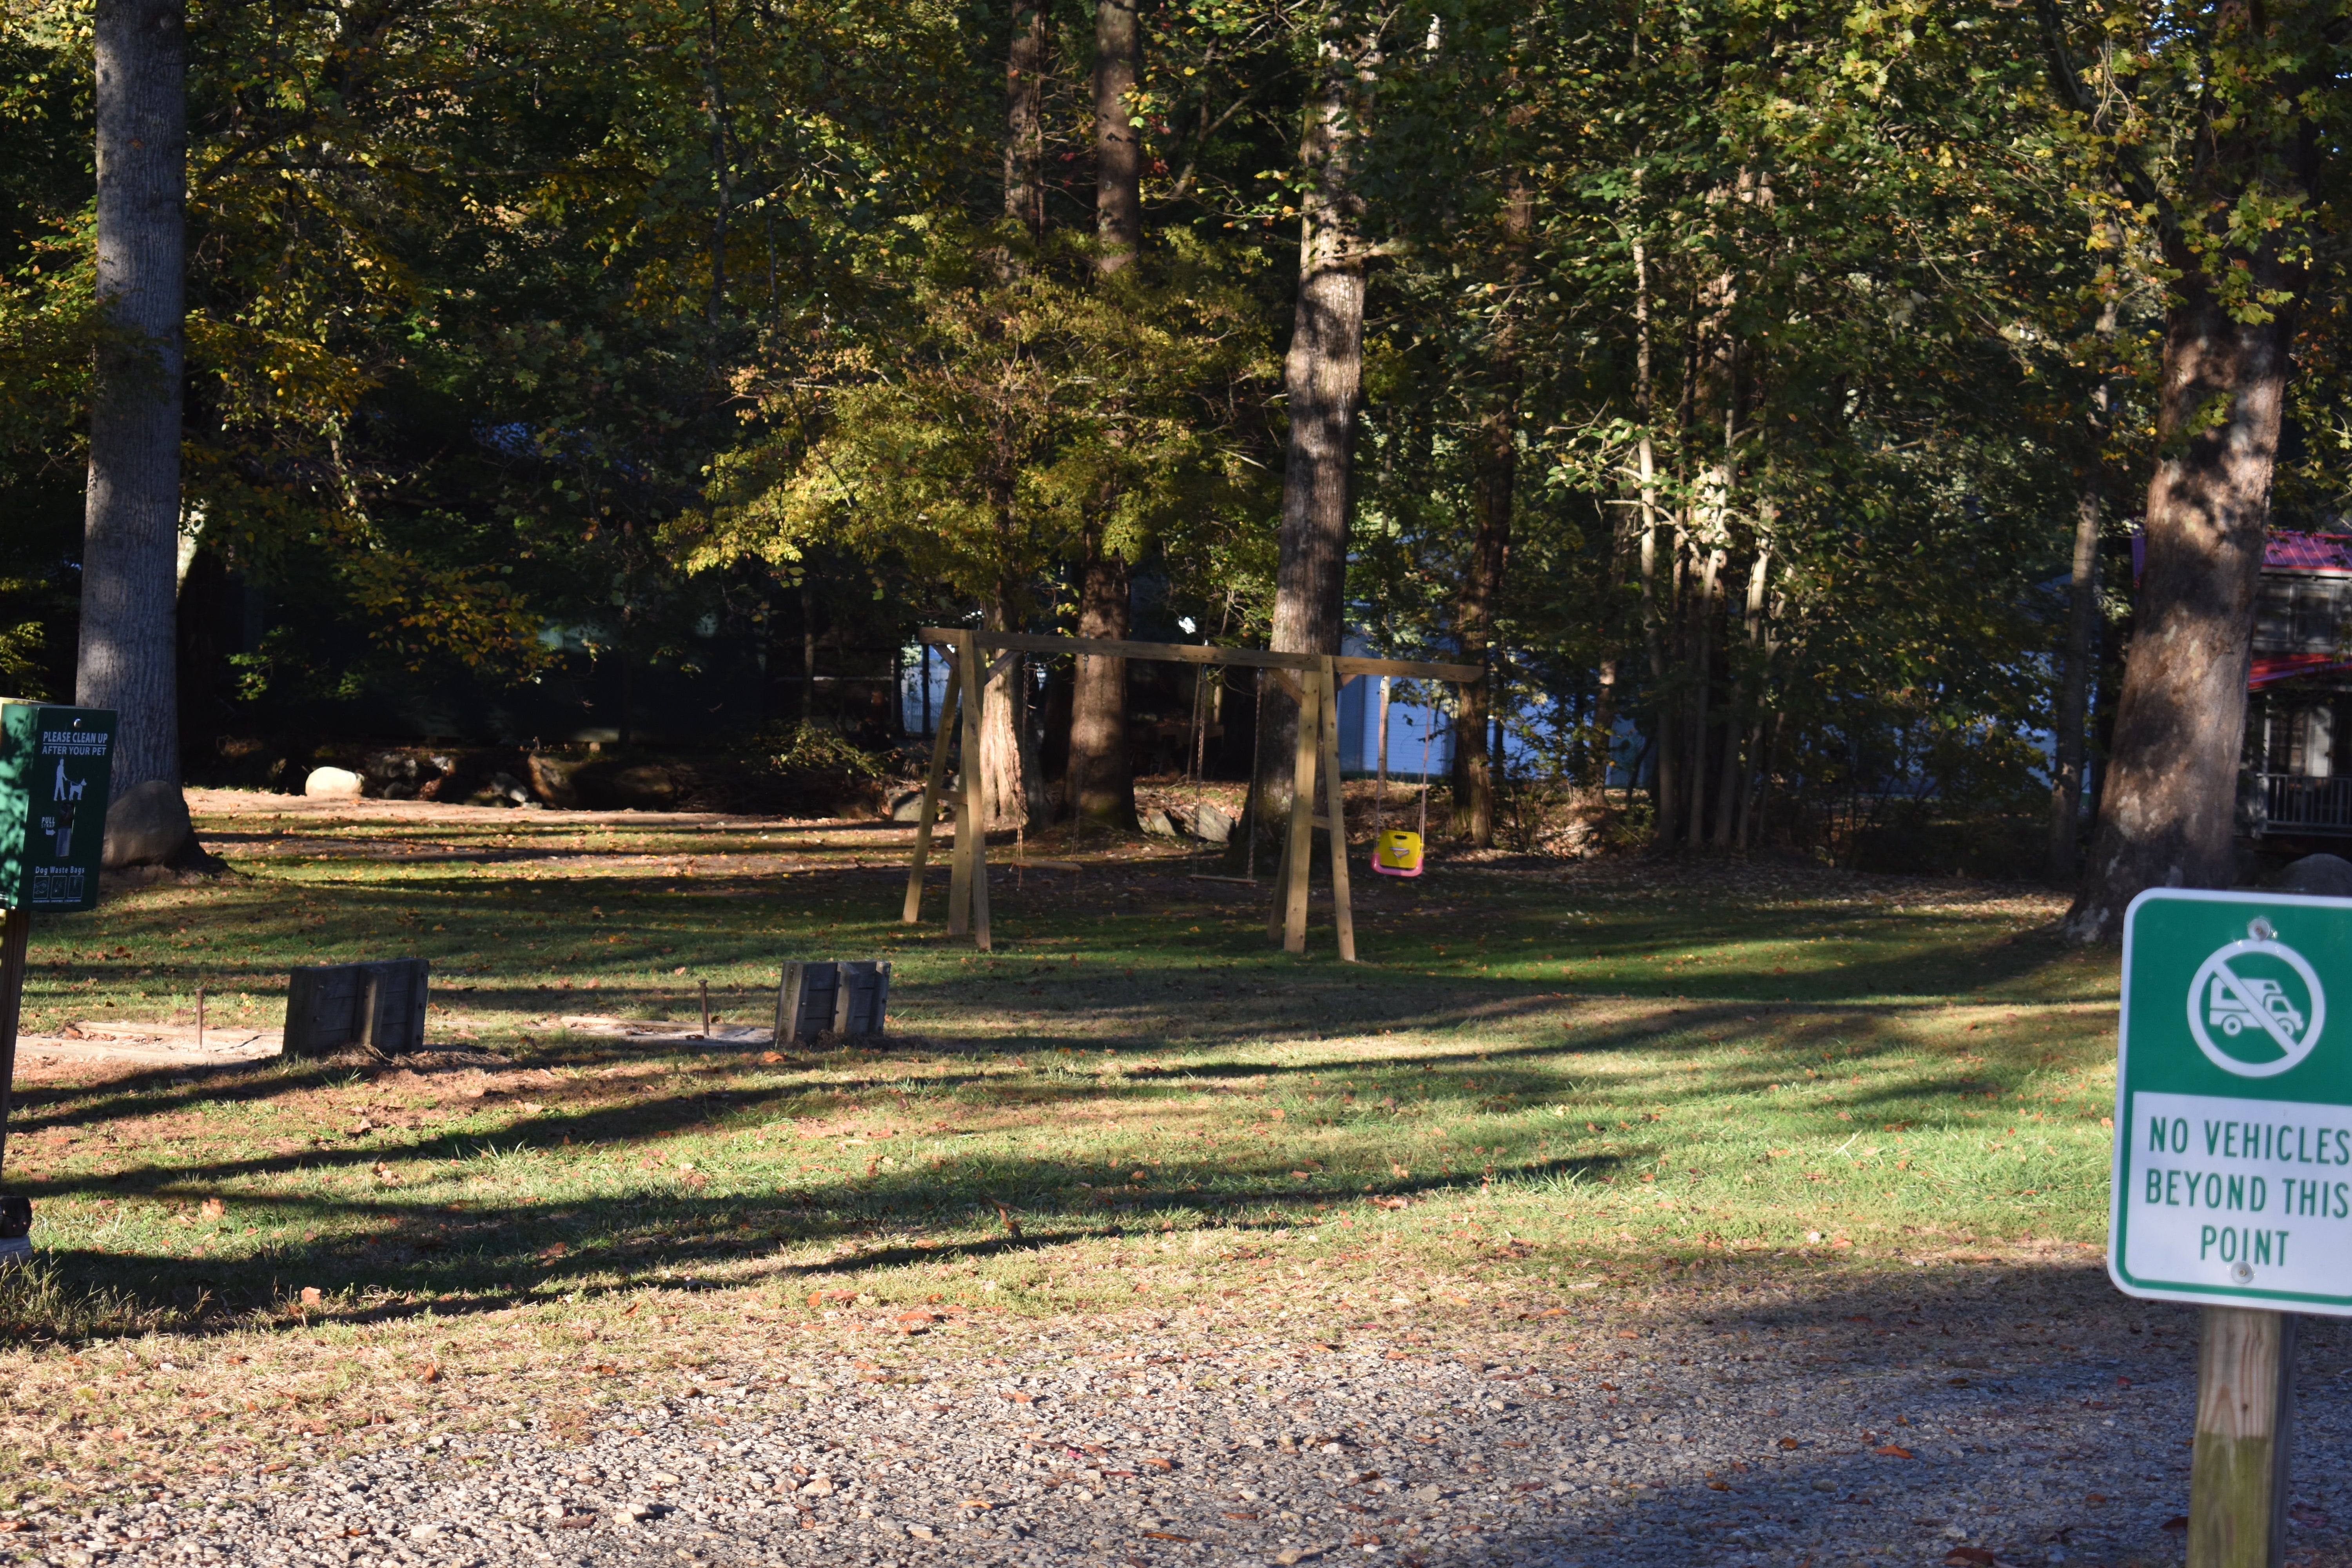 Another area of this RV resort allows dog walking, and there are some swings for children.